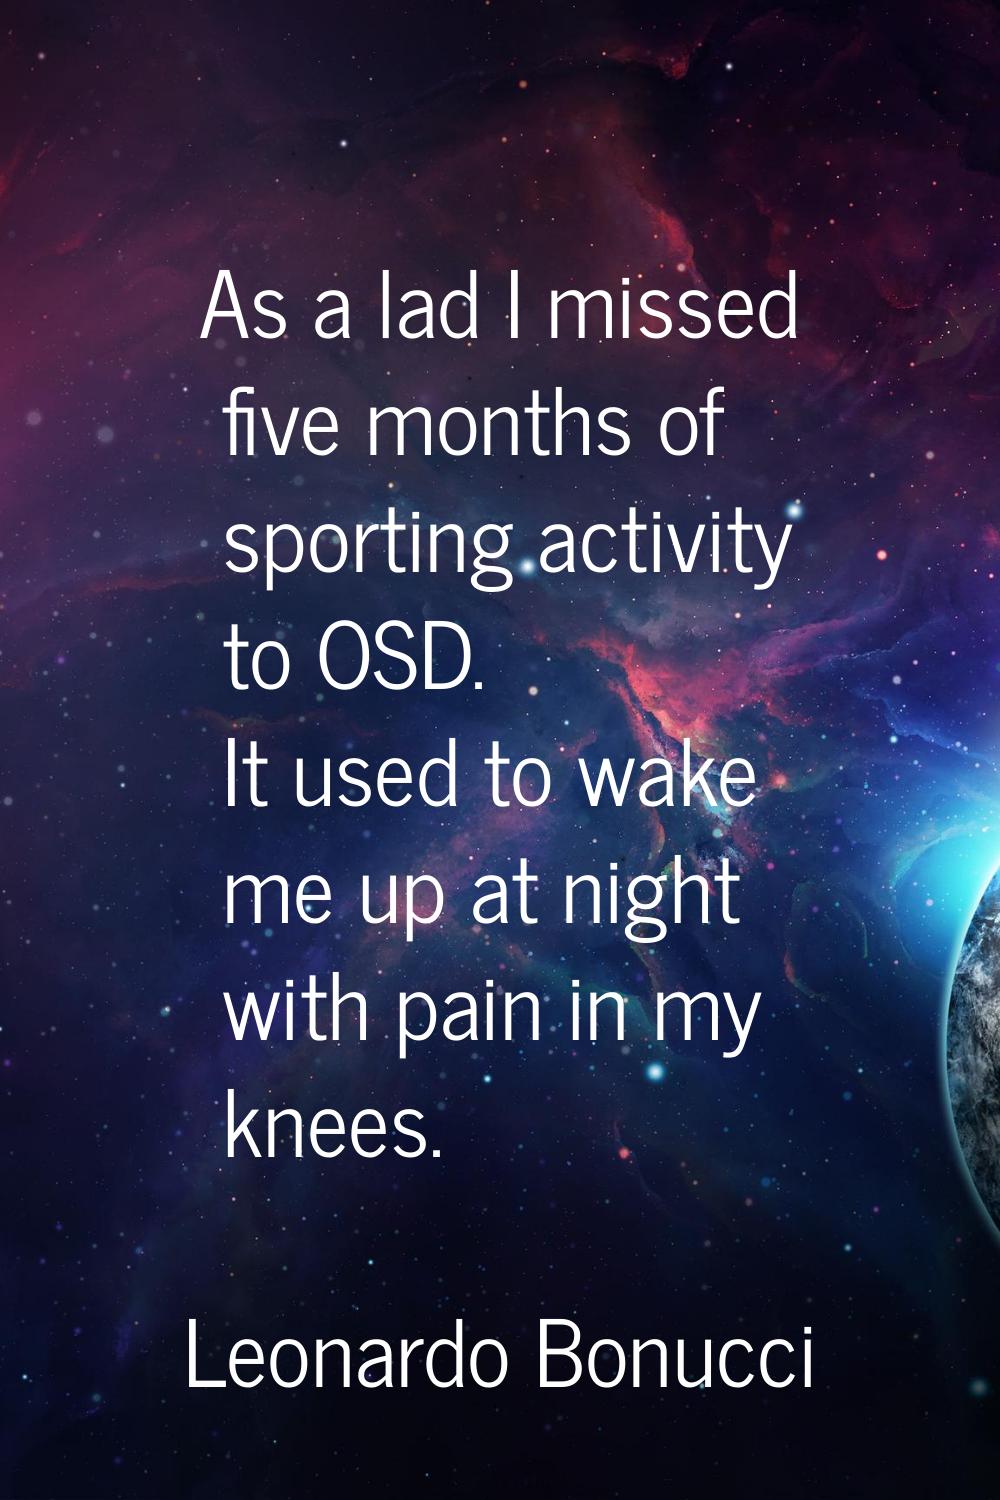 As a lad I missed five months of sporting activity to OSD. It used to wake me up at night with pain